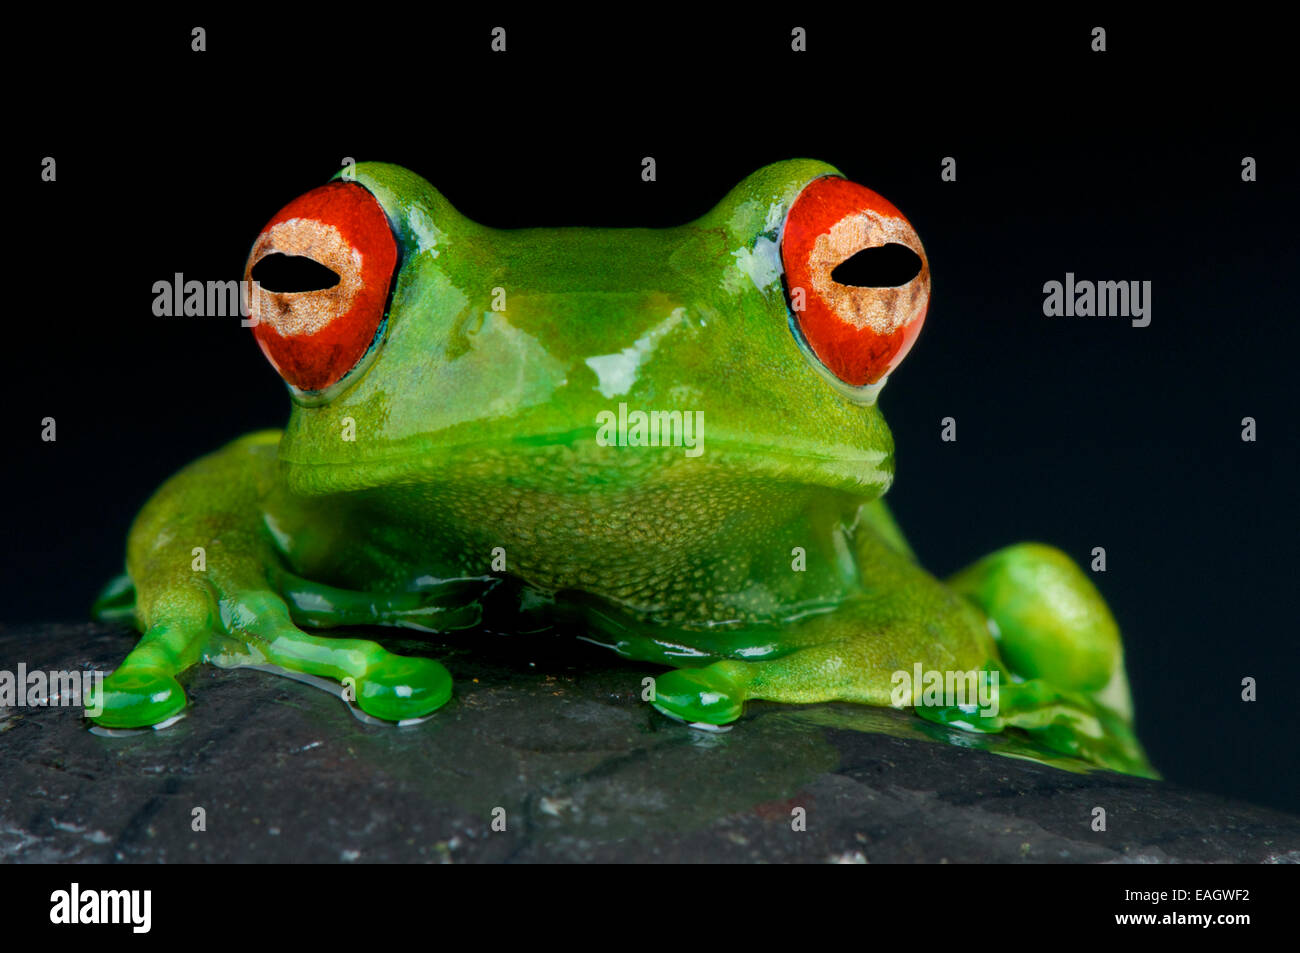 Red-eyed tree frog / Boophis luteus Stock Photo